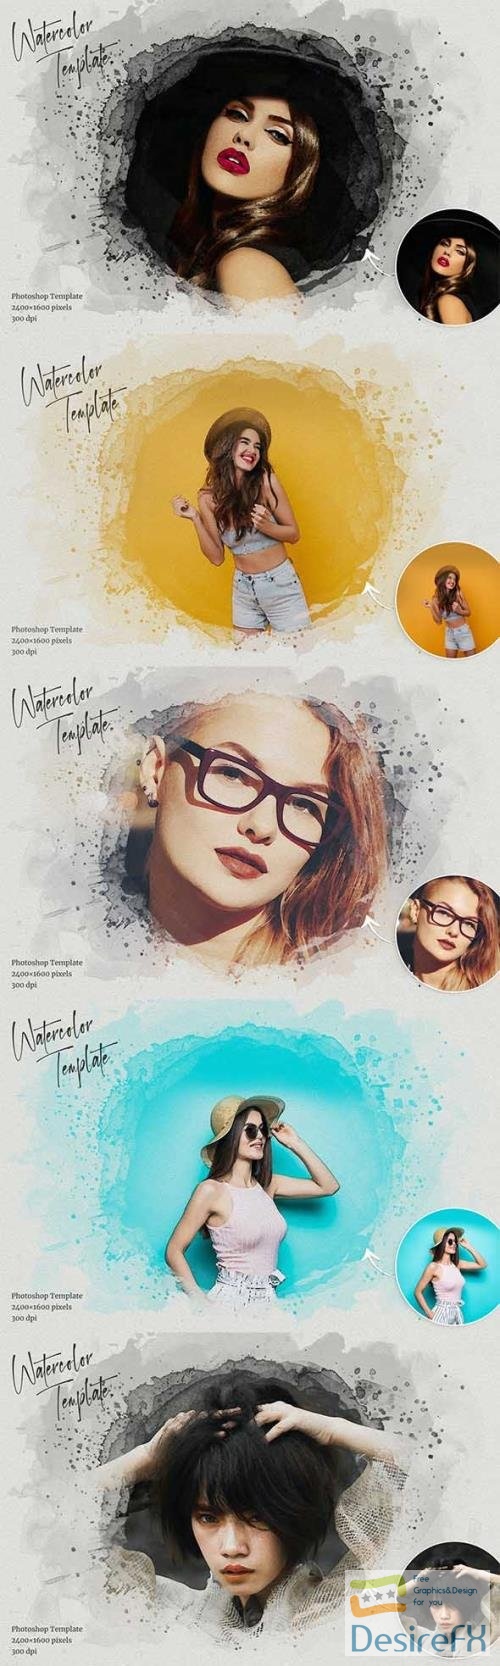 Watercolor Photoshop Template